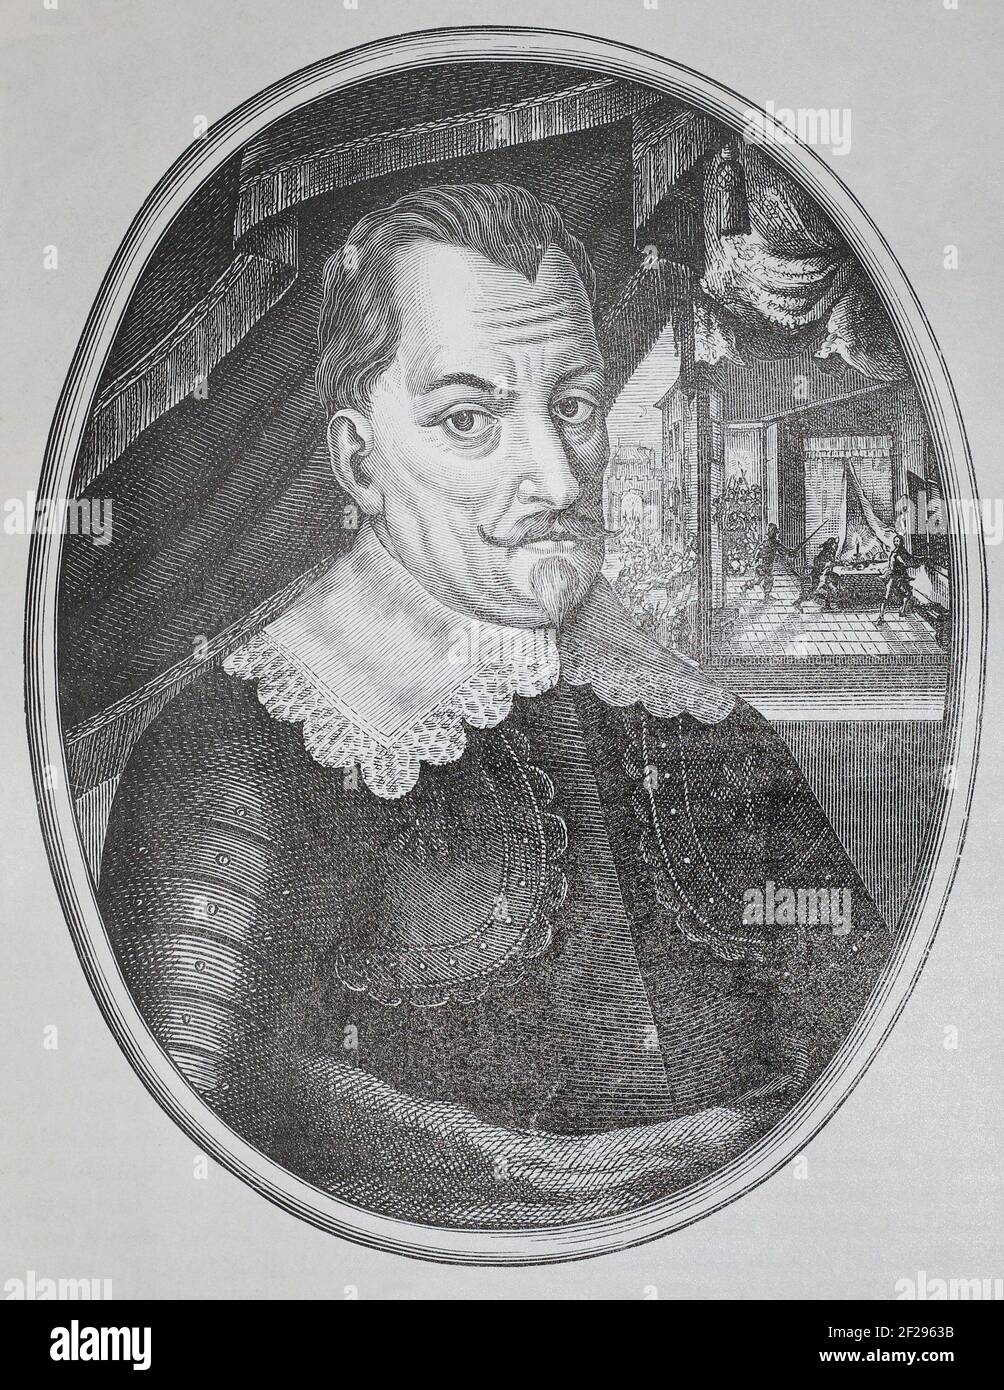 Wallenstein. Medieval engraving. His murder is depicted in the background. Albrecht Wenzel Eusebius von Wallenstein (24 September 1583 - 25 February 1634), also von Waldstein (Czech: Albrecht Václav Eusebius z Valdštejna), was a Bohemian military leader and statesman who fought on the Catholic side during the Thirty Years' War (1618-1648). His successful martial career made him one of the richest and most influential men in the Holy Roman Empire by the time of his death. Stock Photo